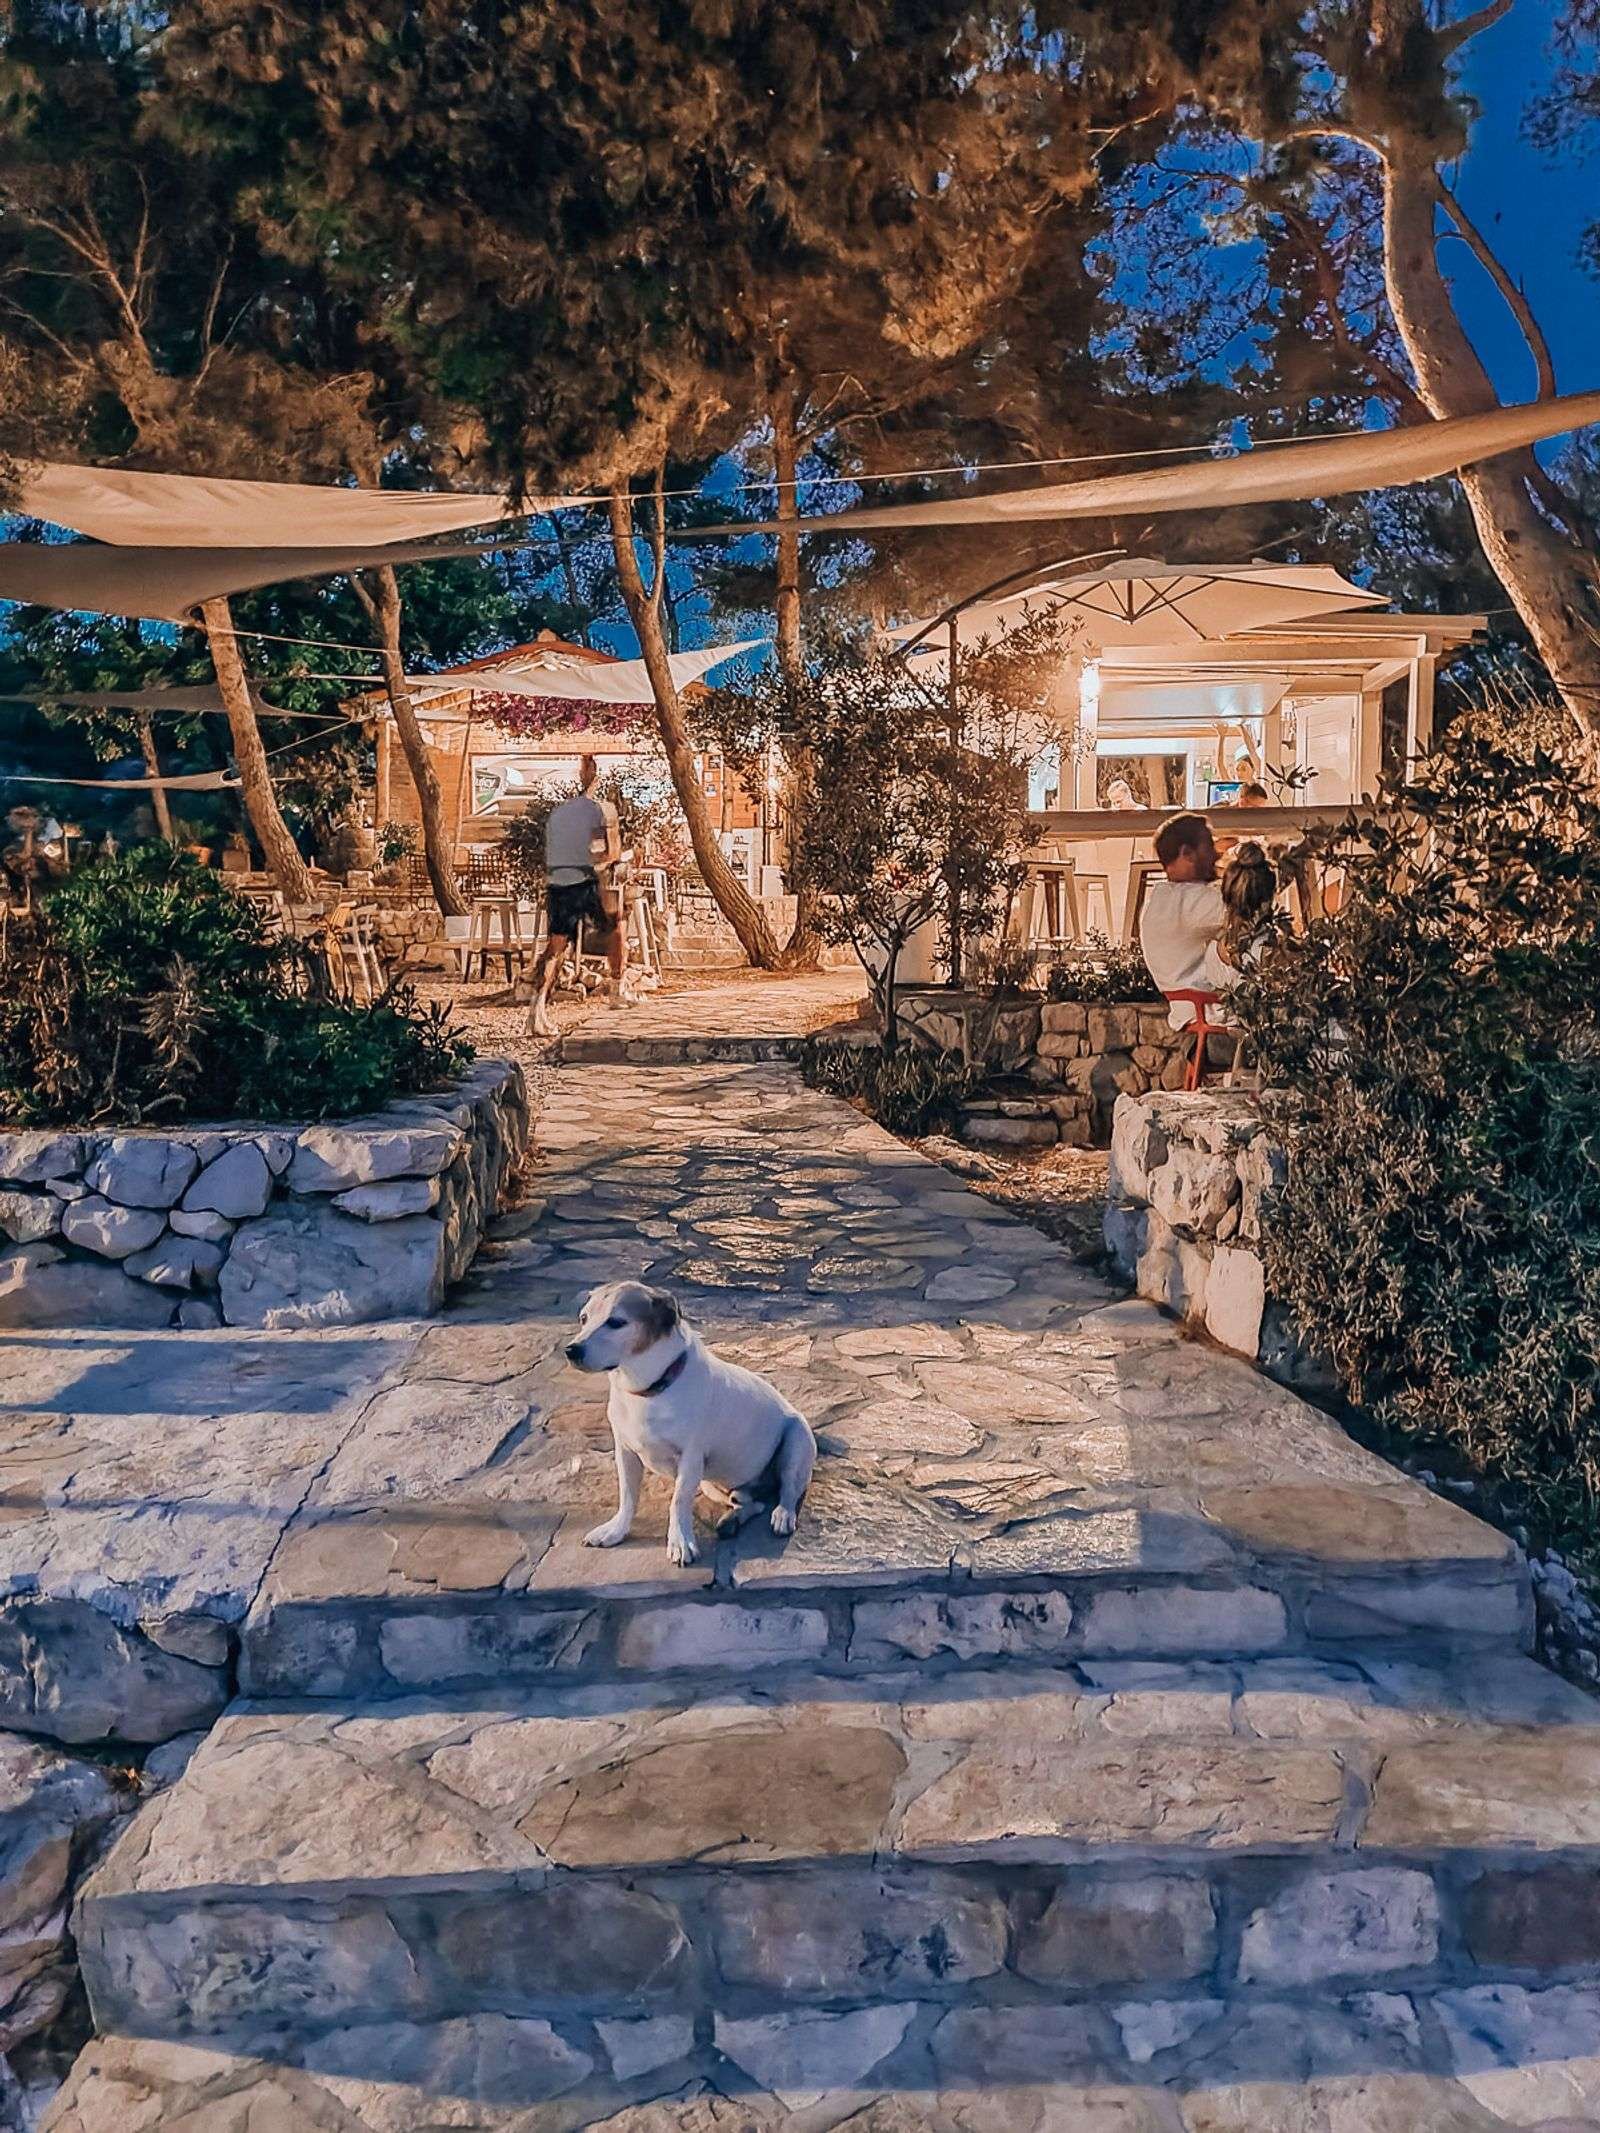 A shot at dusk of an outdoor bar area lit up with barmen in the bar and people at tables with trees dotted around. Dog sits on a stone step in the foreground